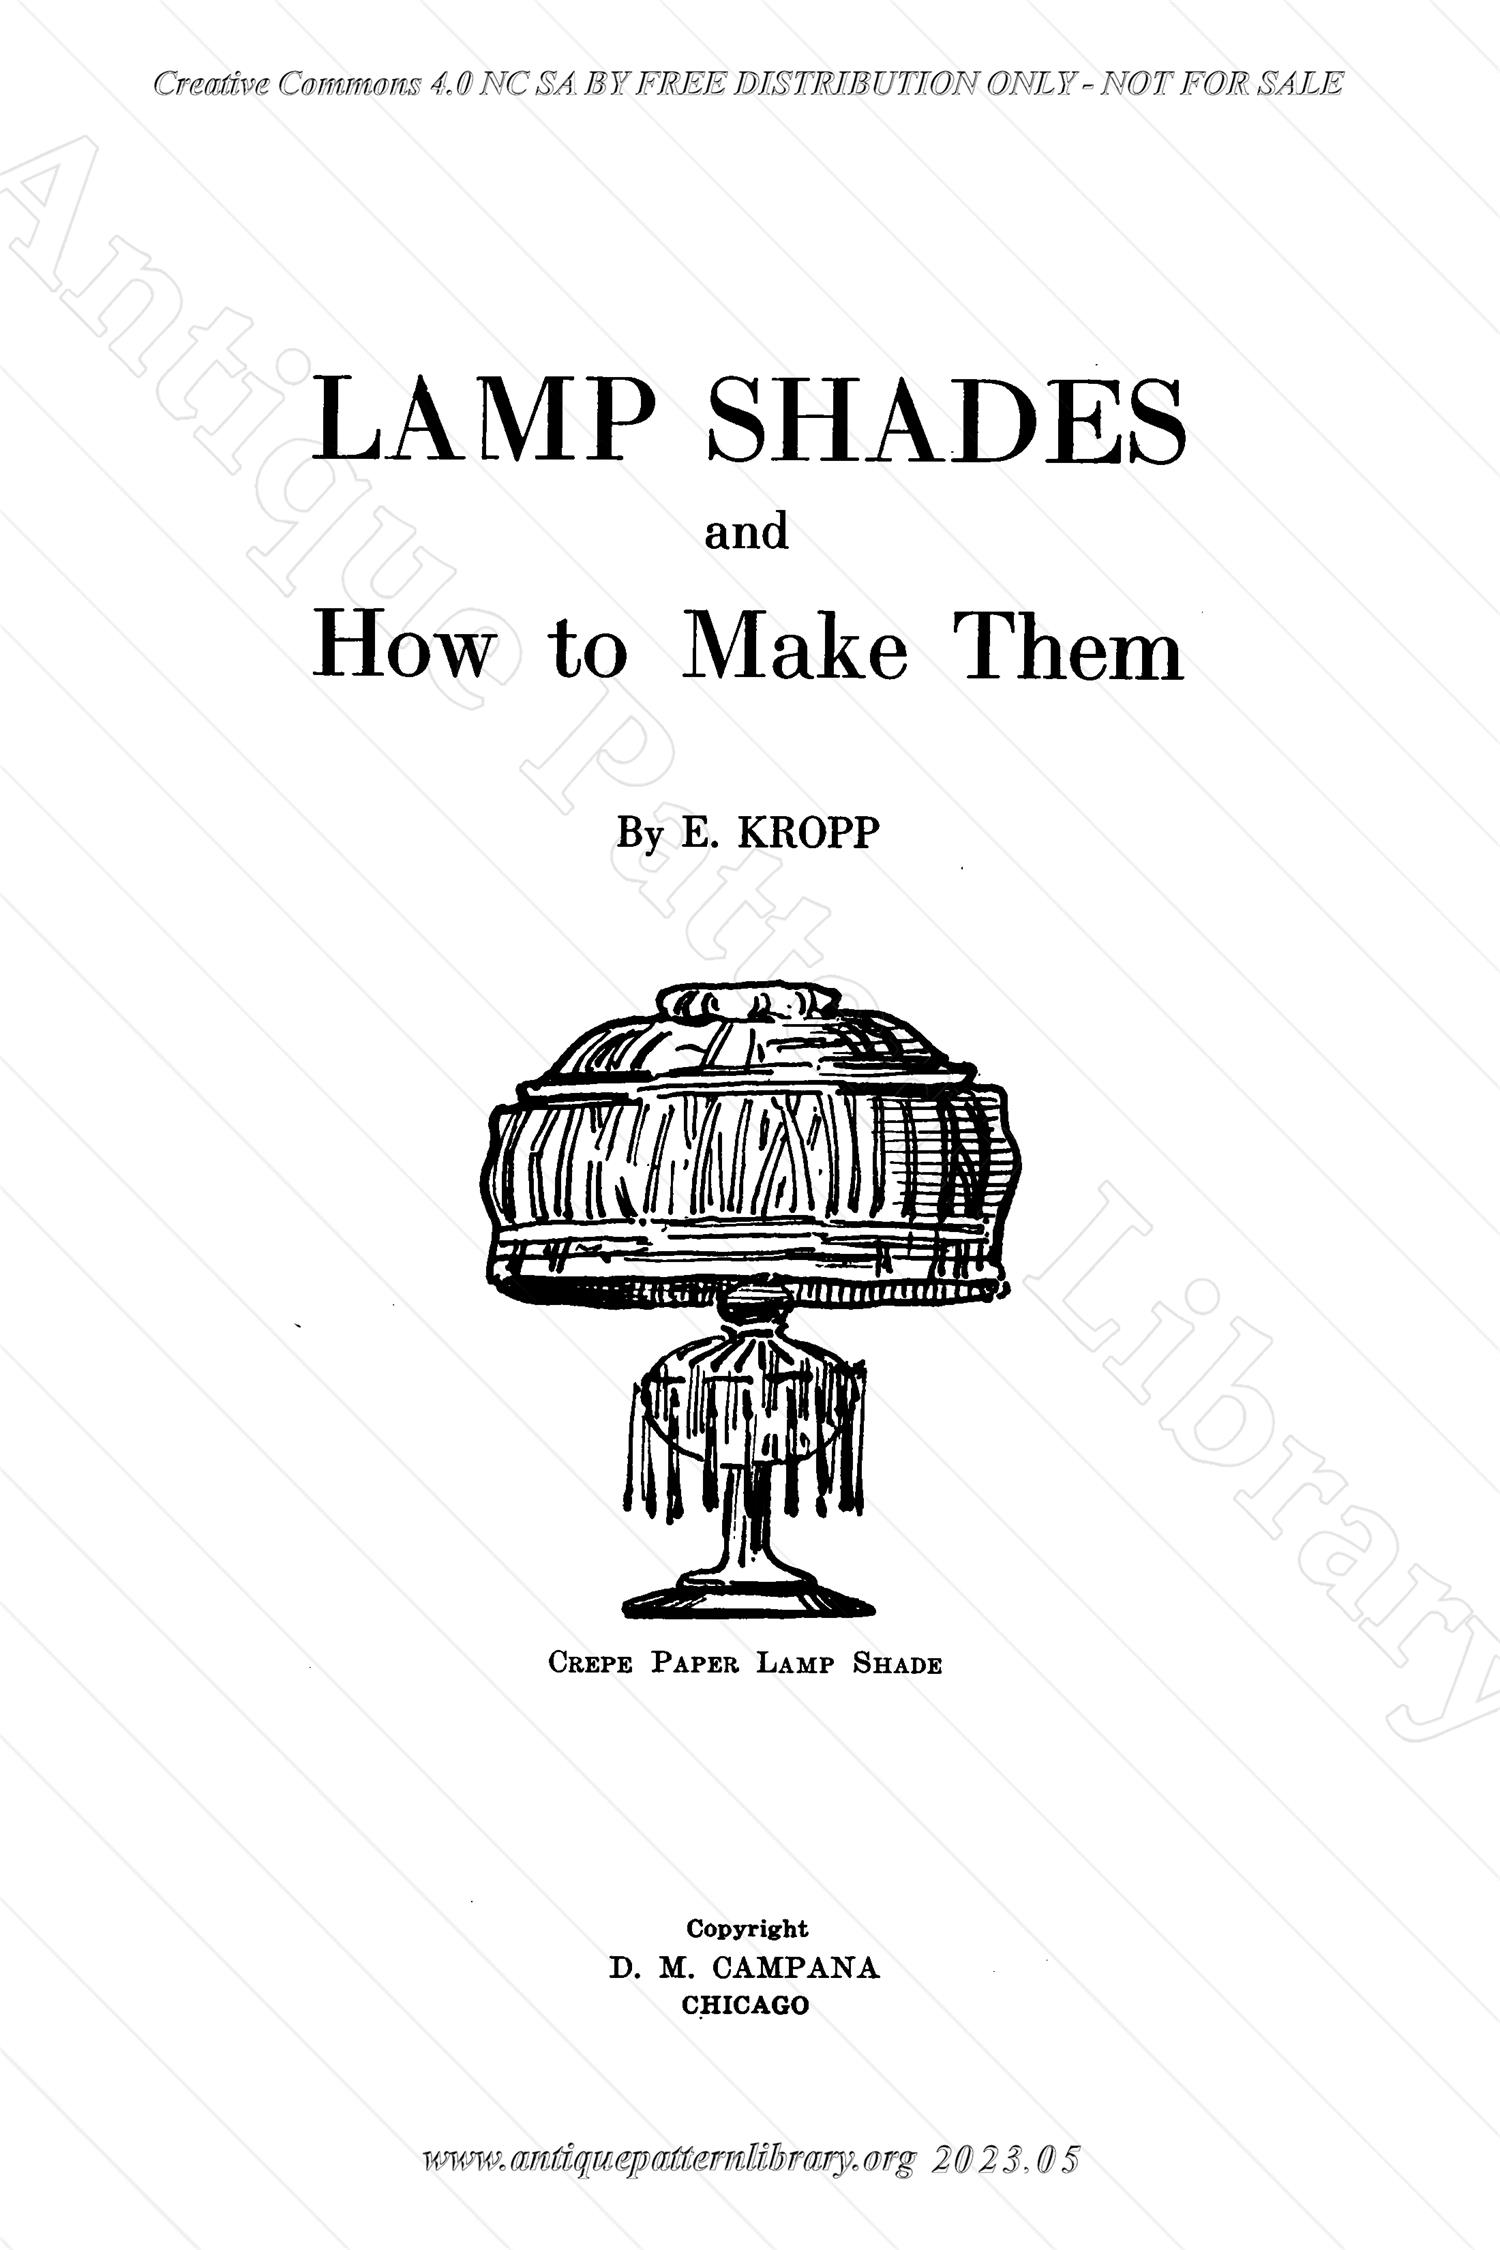 N-WS001 Lamp Shades and How to Make Them